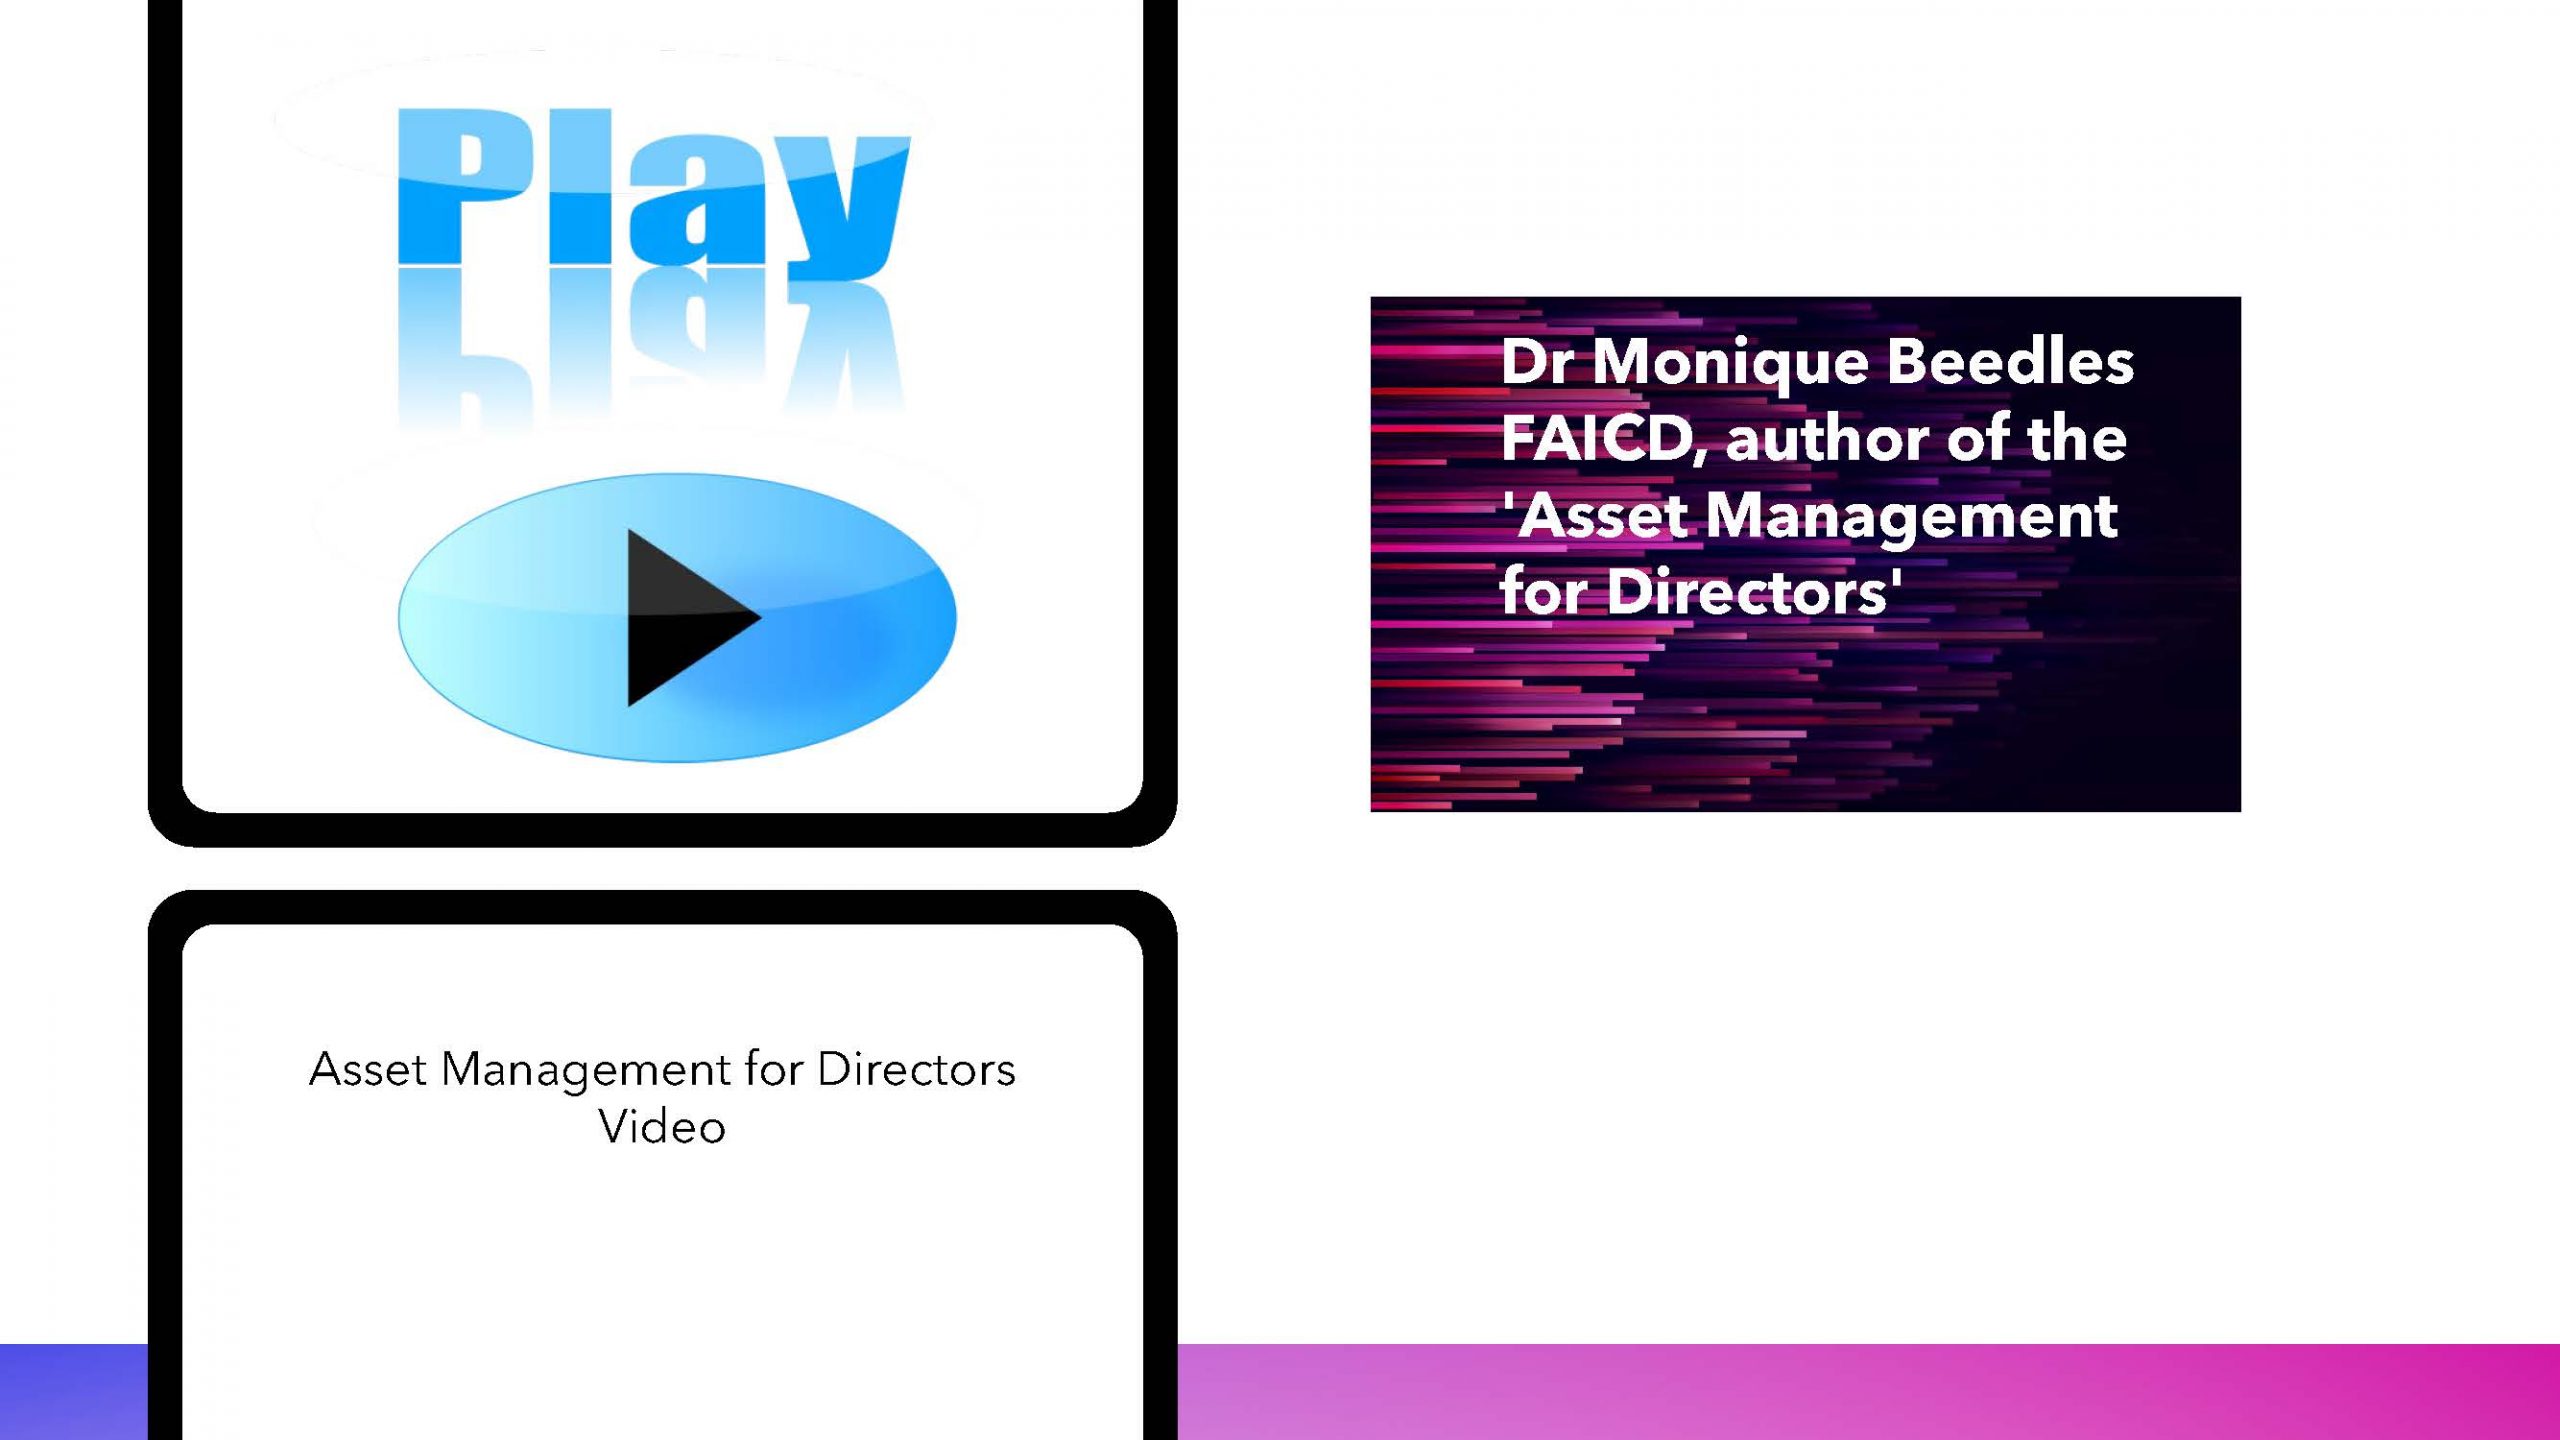 Dr Monique Beedles FAICD, author of the newly published 'Asset Management for Directors' explains why directors are asset managers and why successful asset management involves engaging the entire organisation.